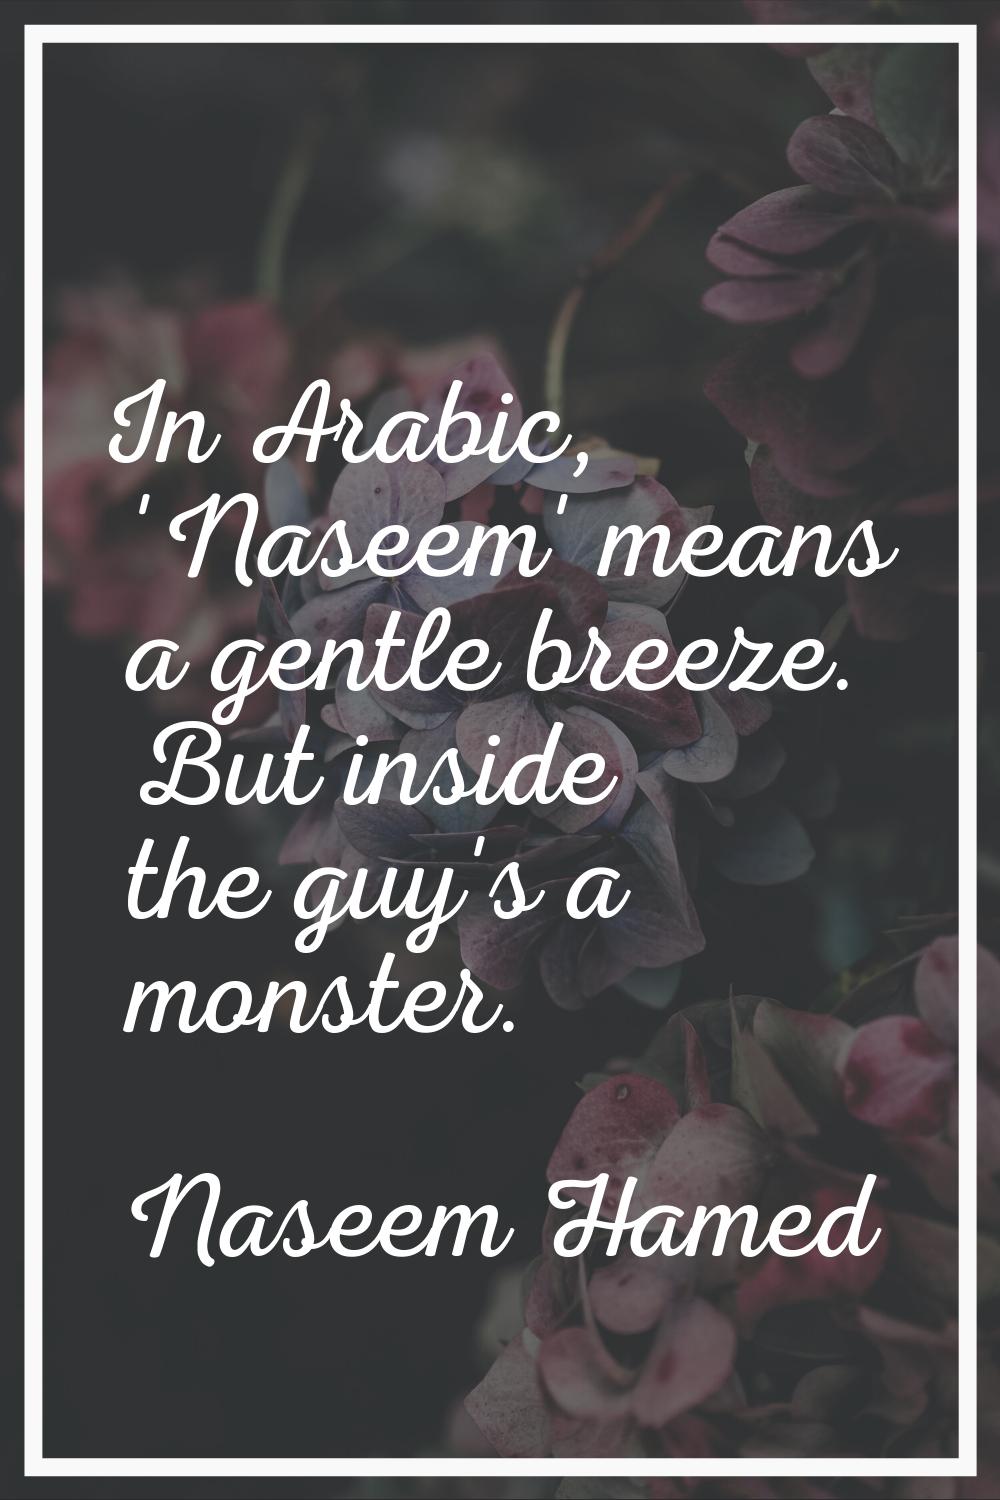 In Arabic, 'Naseem' means a gentle breeze. But inside the guy's a monster.